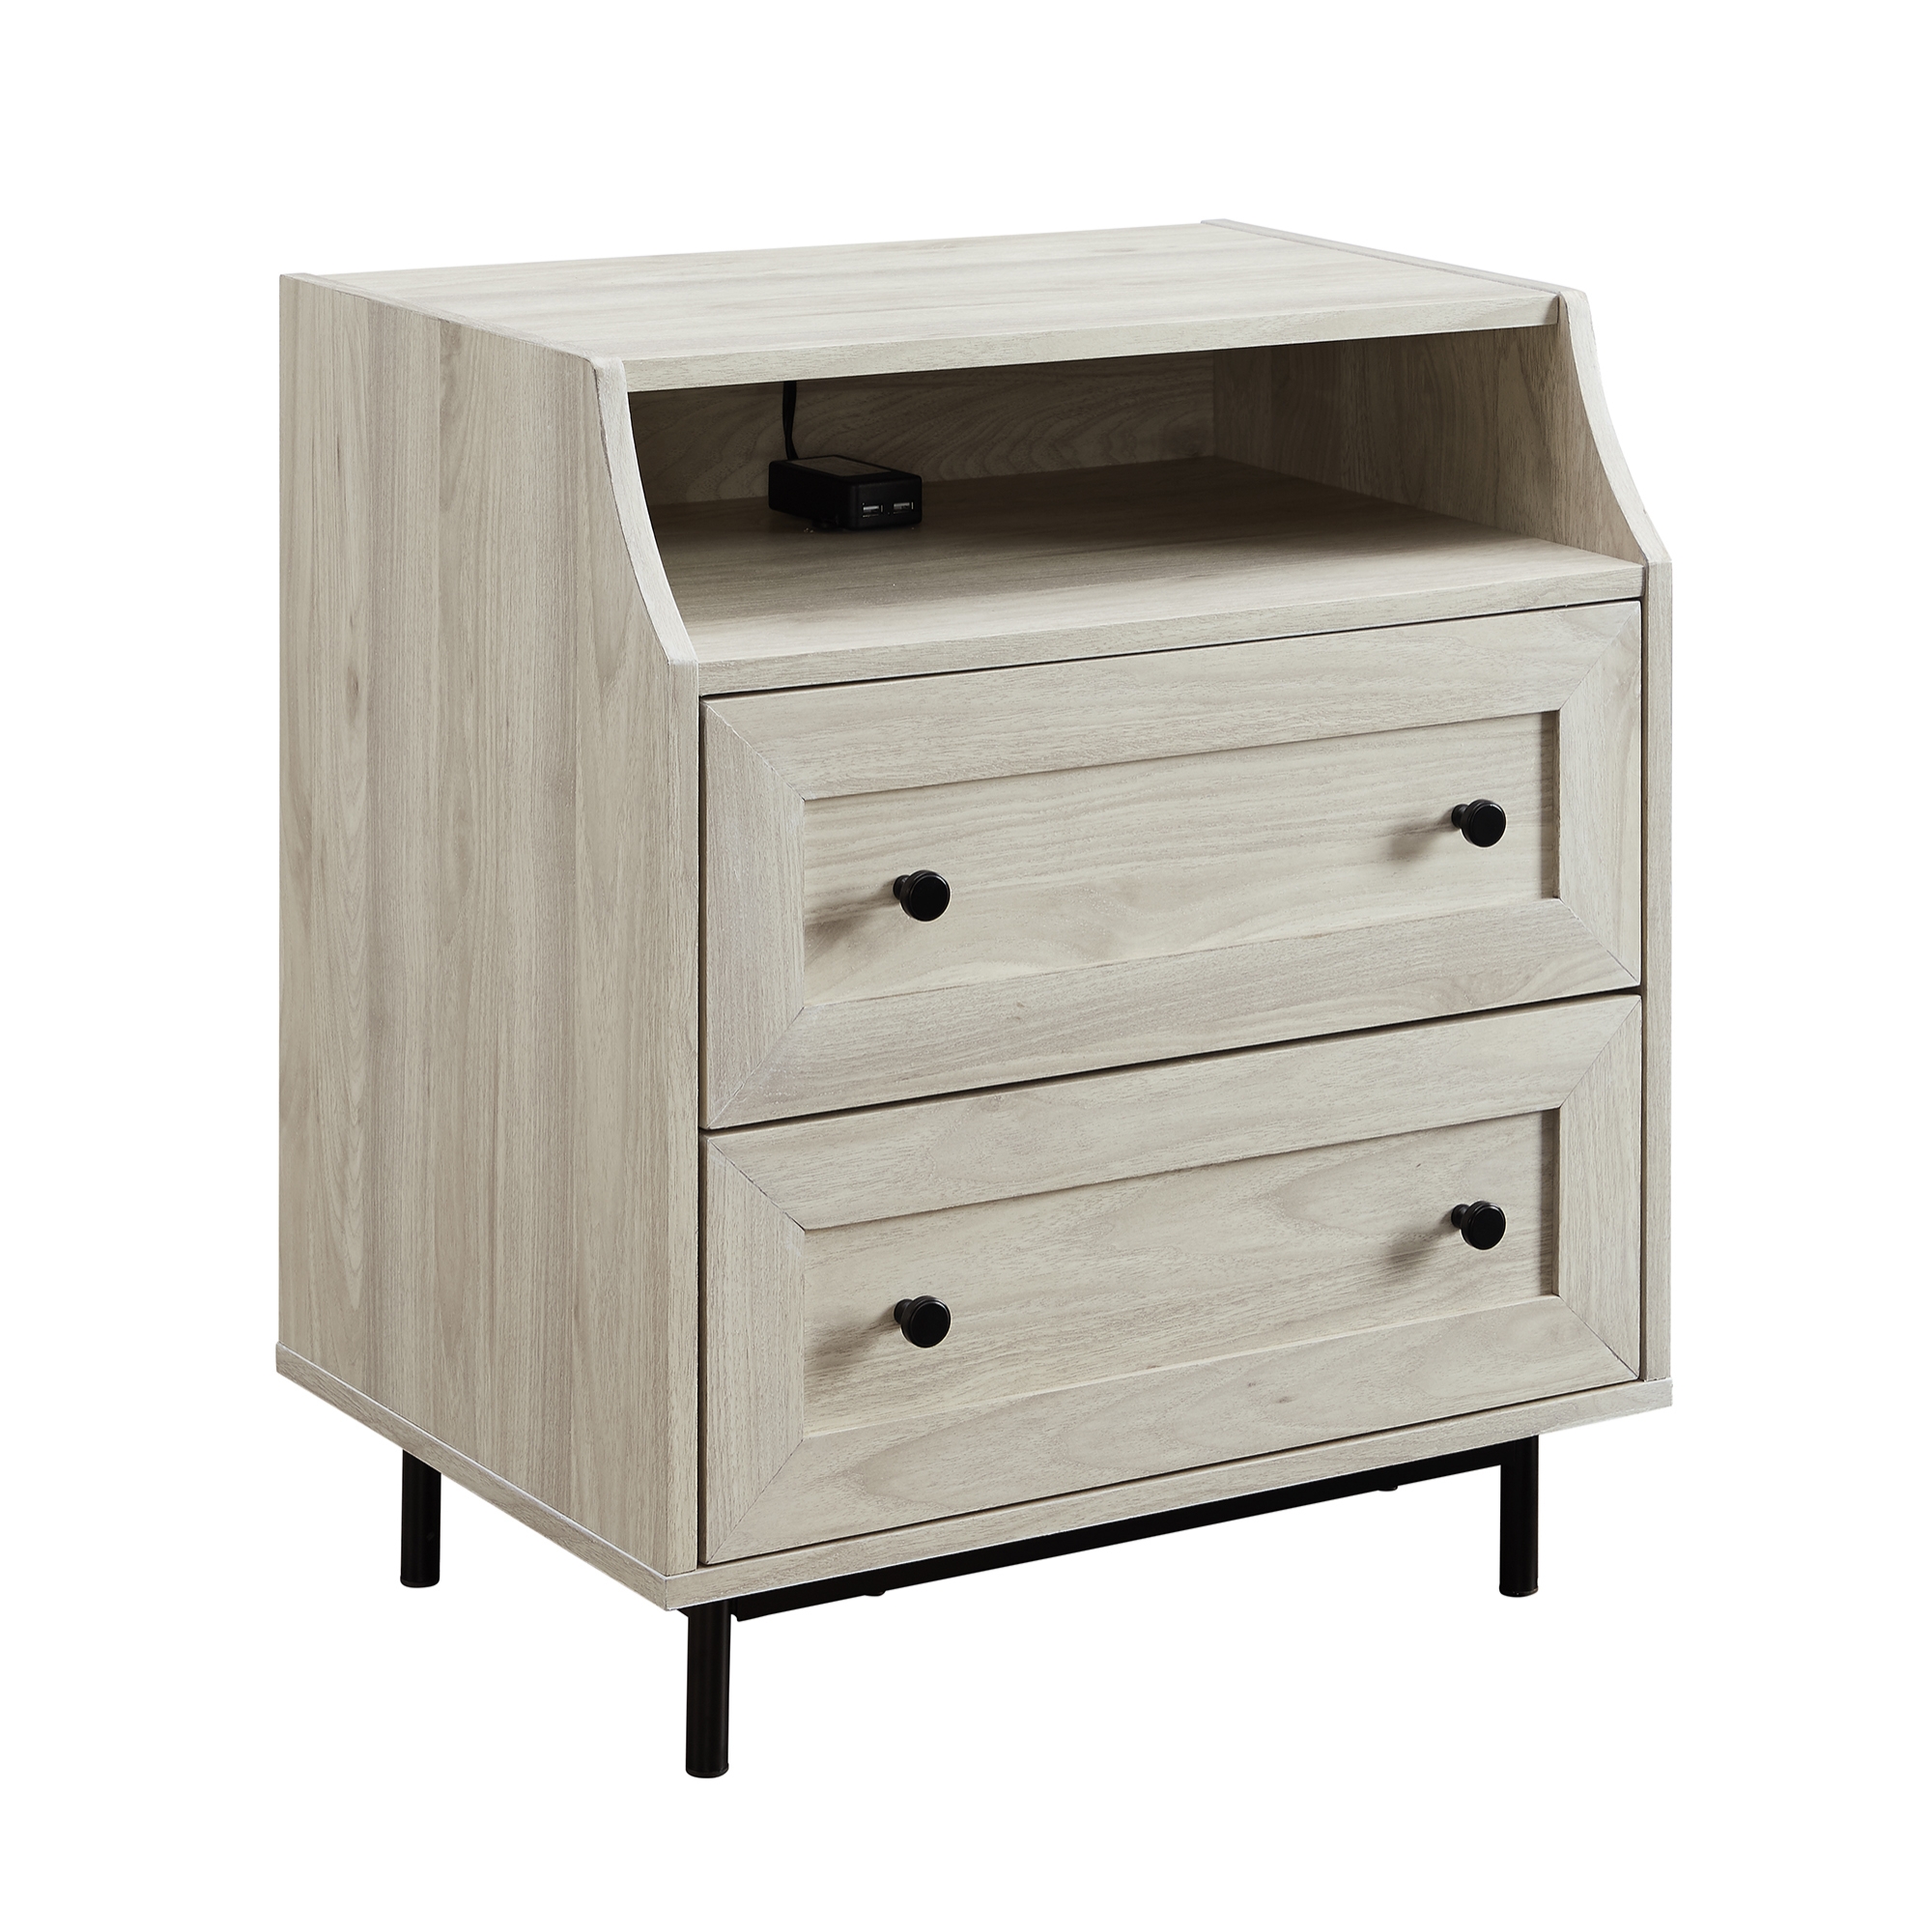 Welsh 22" Curved Open Top 2 Drawer Nightstand with USB - Birch - Image 1